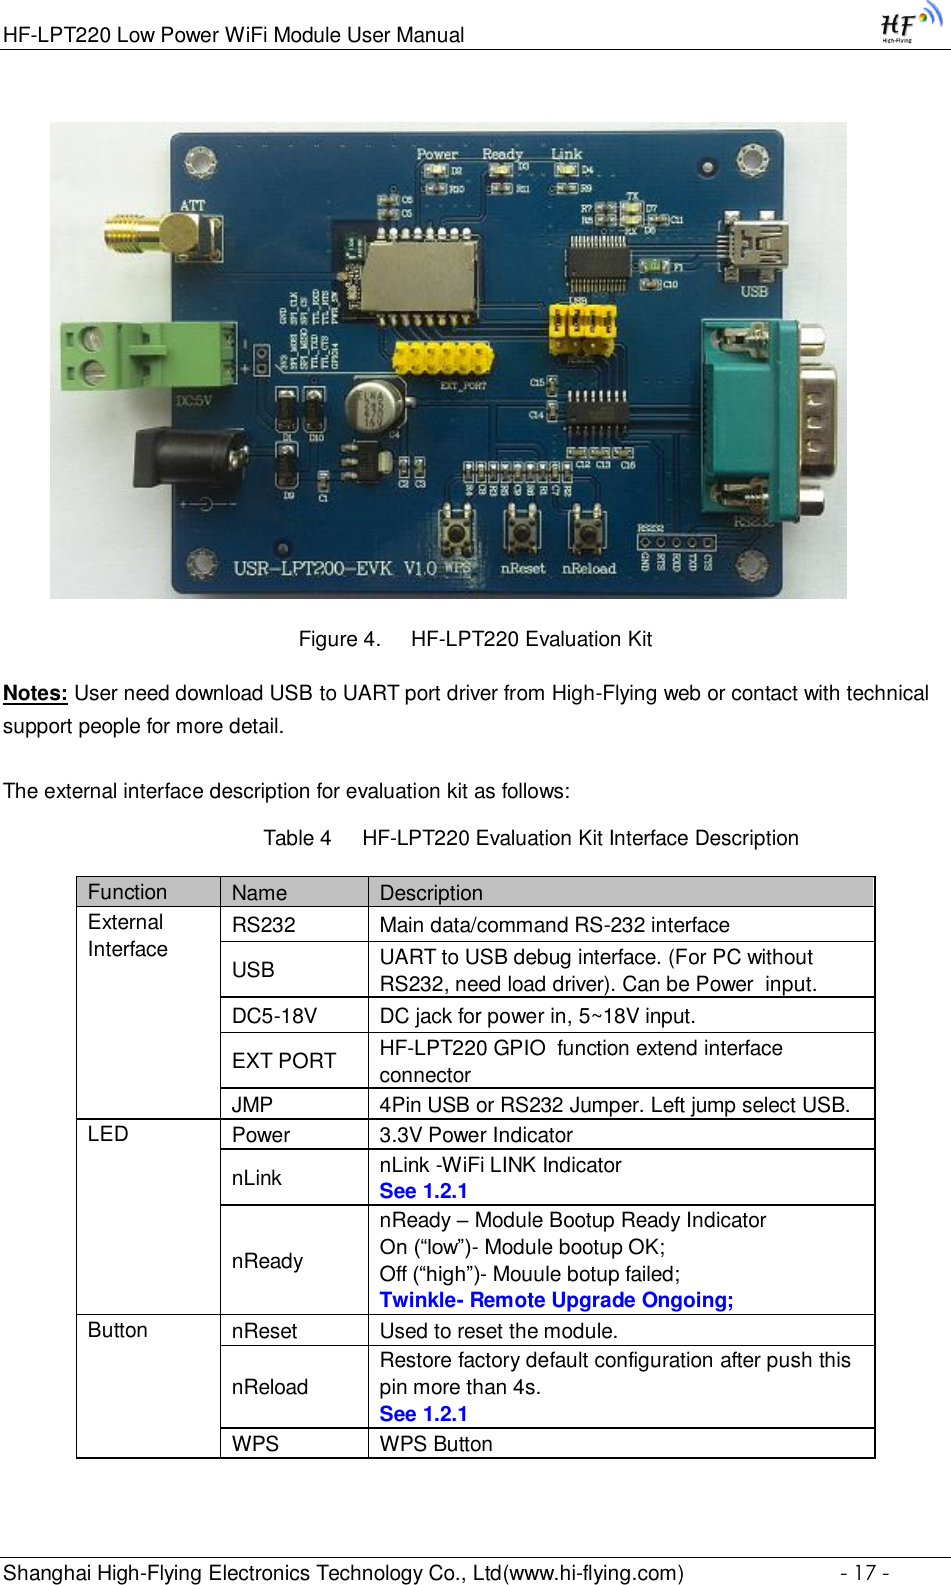 HF-LPT220 Low Power WiFi Module User Manual Shanghai High-Flying Electronics Technology Co., Ltd(www.hi-flying.com)  - 17 -                                     Figure 4. HF-LPT220 Evaluation Kit Notes: User need download USB to UART port driver from High-Flying web or contact with technical support people for more detail.  The external interface description for evaluation kit as follows: Table 4     HF-LPT220 Evaluation Kit Interface Description            Function Name Description External Interface RS232 Main data/command RS-232 interface USB UART to USB debug interface. (For PC without RS232, need load driver). Can be Power  input. DC5-18V DC jack for power in, 5~18V input. EXT PORT HF-LPT220 GPIO  function extend interface connector JMP 4Pin USB or RS232 Jumper. Left jump select USB. LED Power 3.3V Power Indicator nLink nLink -WiFi LINK Indicator See 1.2.1 nReady nReady – Module Bootup Ready Indicator On (“low”)- Module bootup OK; Off (“high”)- Mouule botup failed; Twinkle- Remote Upgrade Ongoing; Button nReset Used to reset the module. nReload Restore factory default configuration after push this pin more than 4s. See 1.2.1 WPS WPS Button  